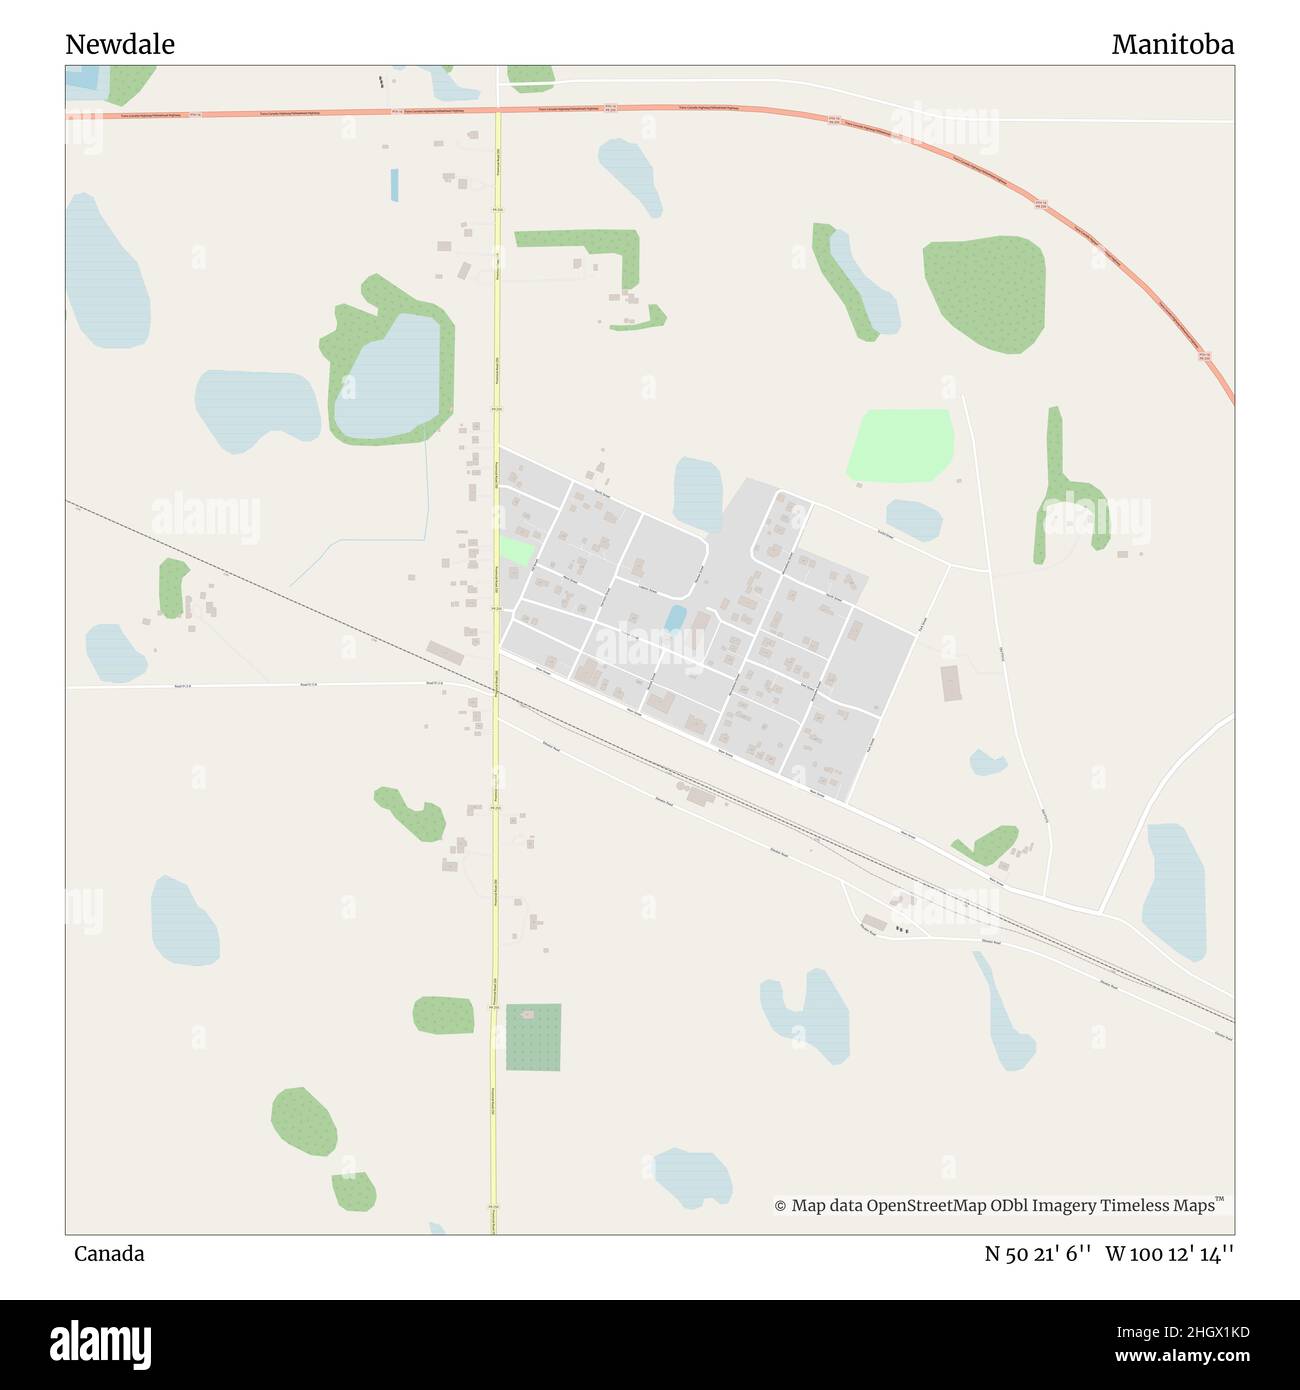 Newdale, Canada, Manitoba, N 50 21' 6'', W 100 12' 14'', map, Timeless Map published in 2021. Travelers, explorers and adventurers like Florence Nightingale, David Livingstone, Ernest Shackleton, Lewis and Clark and Sherlock Holmes relied on maps to plan travels to the world's most remote corners, Timeless Maps is mapping most locations on the globe, showing the achievement of great dreams Stock Photo